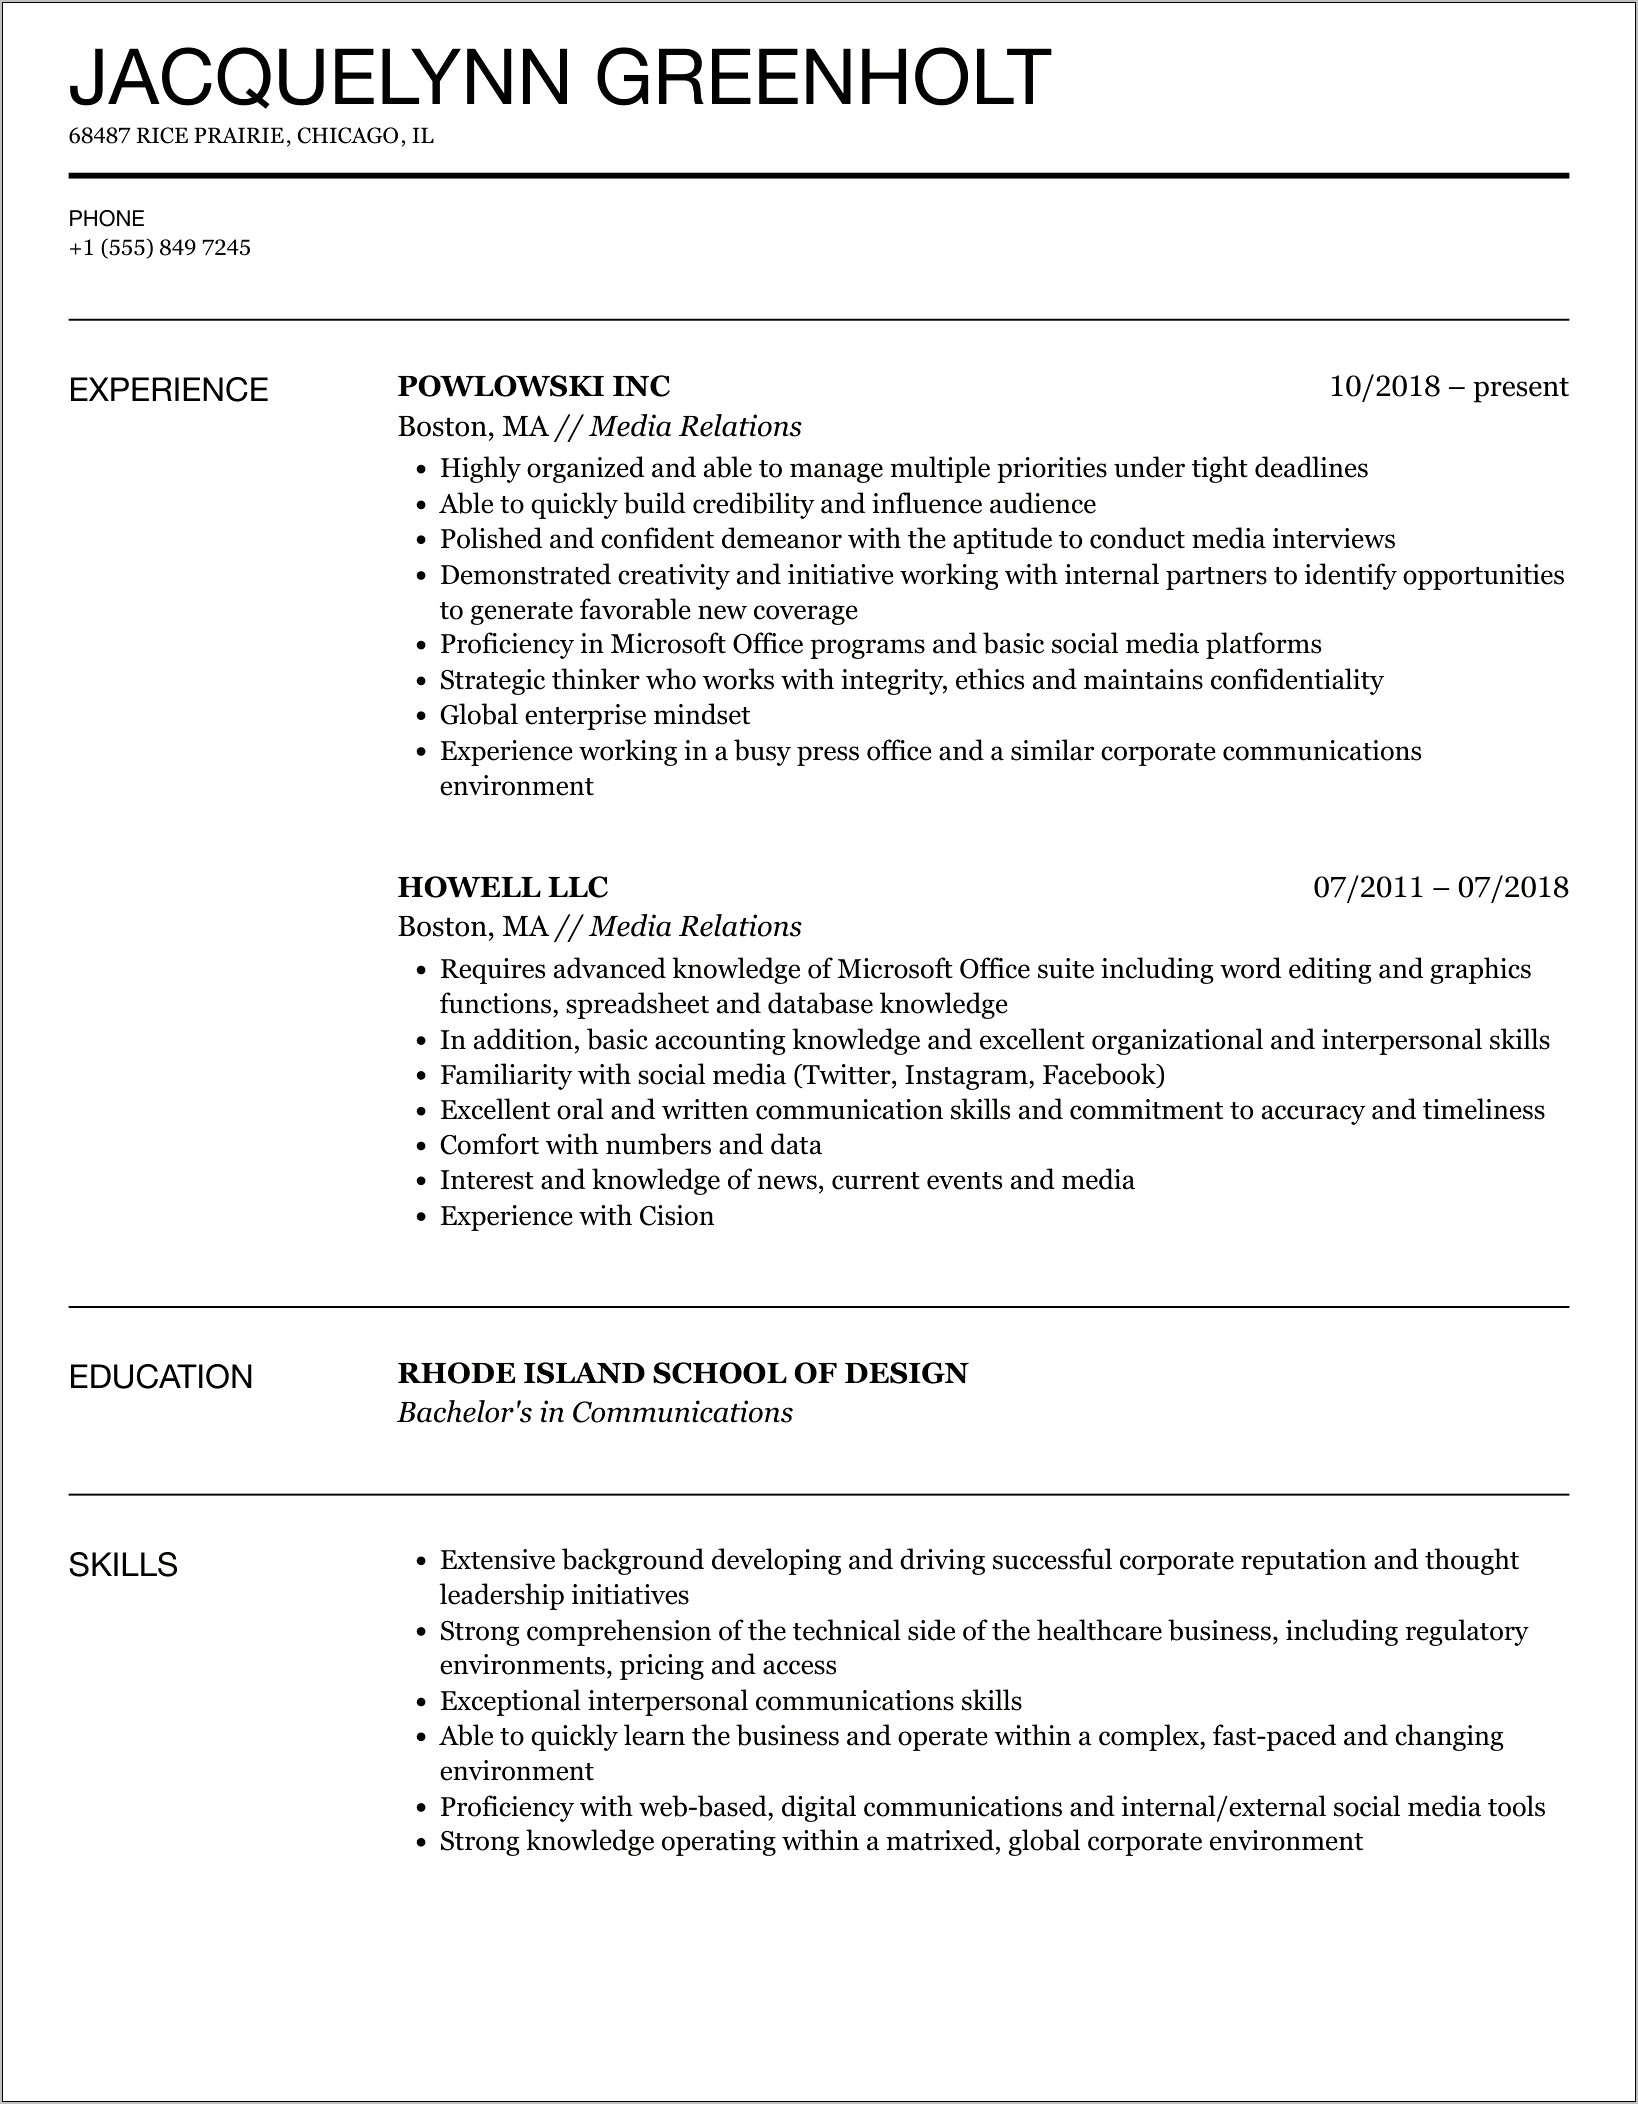 Public Relations Objective Statement Resume